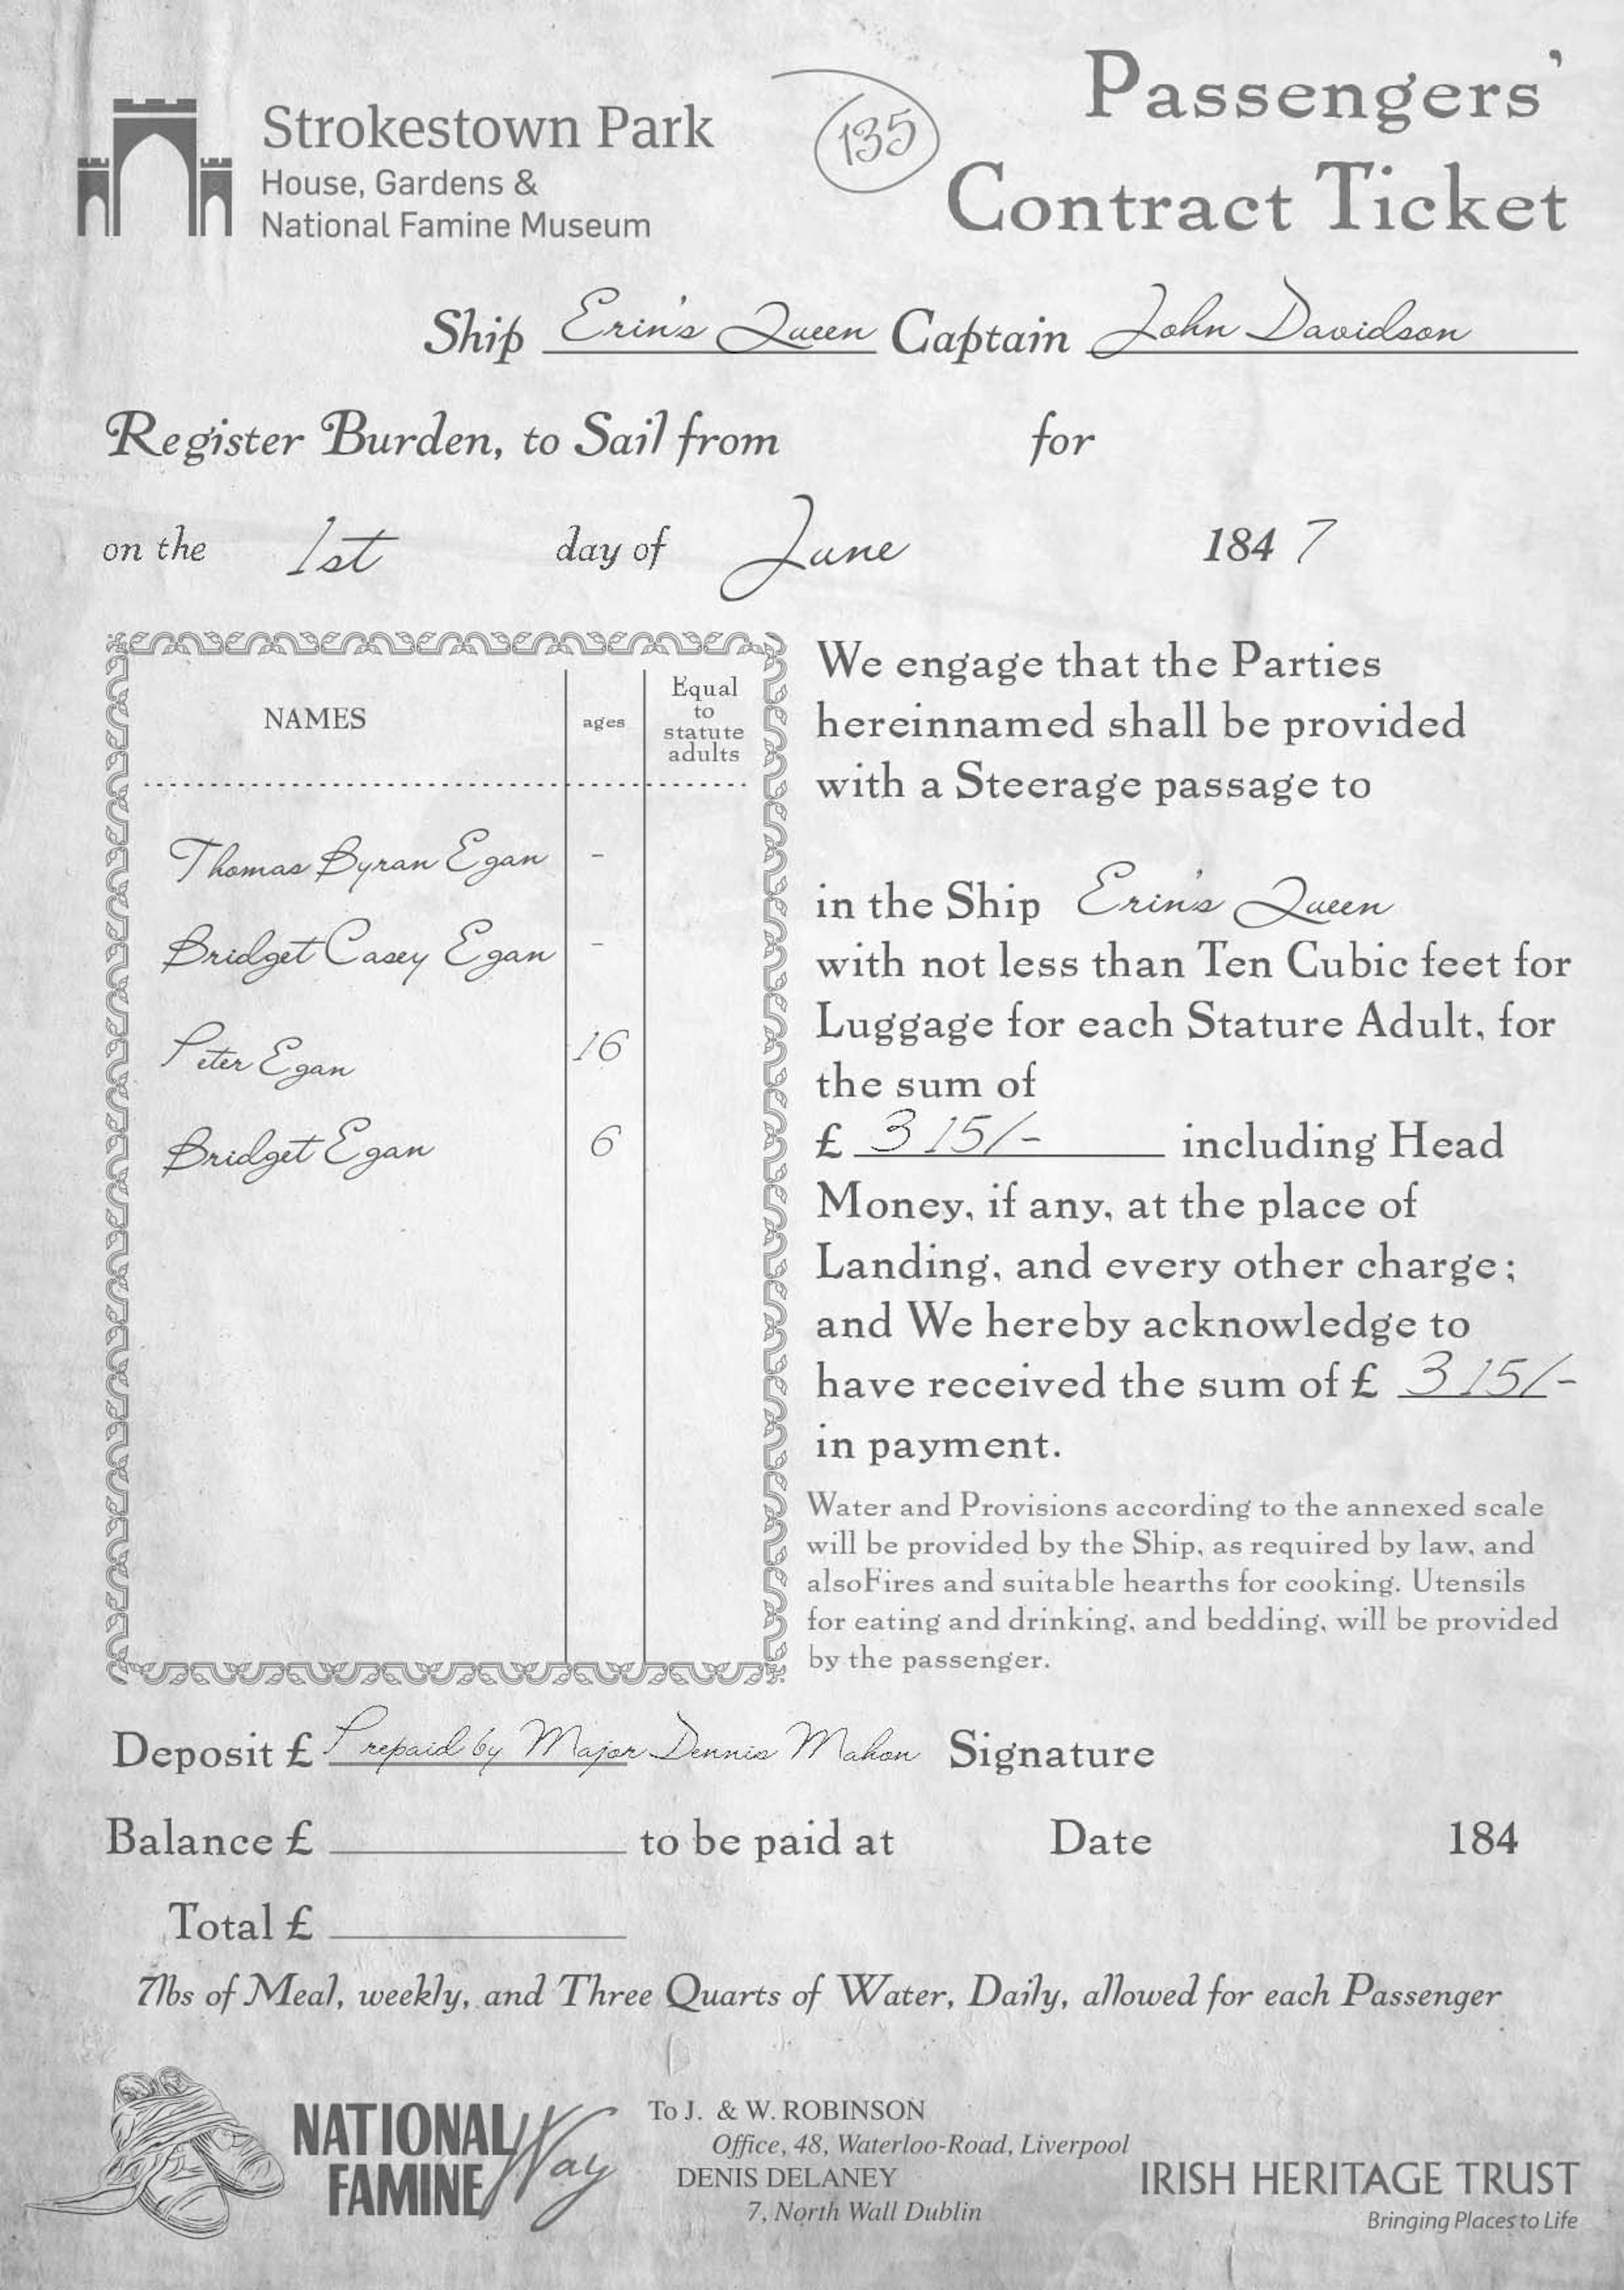 A replica passenger ticket for a ship in 1847